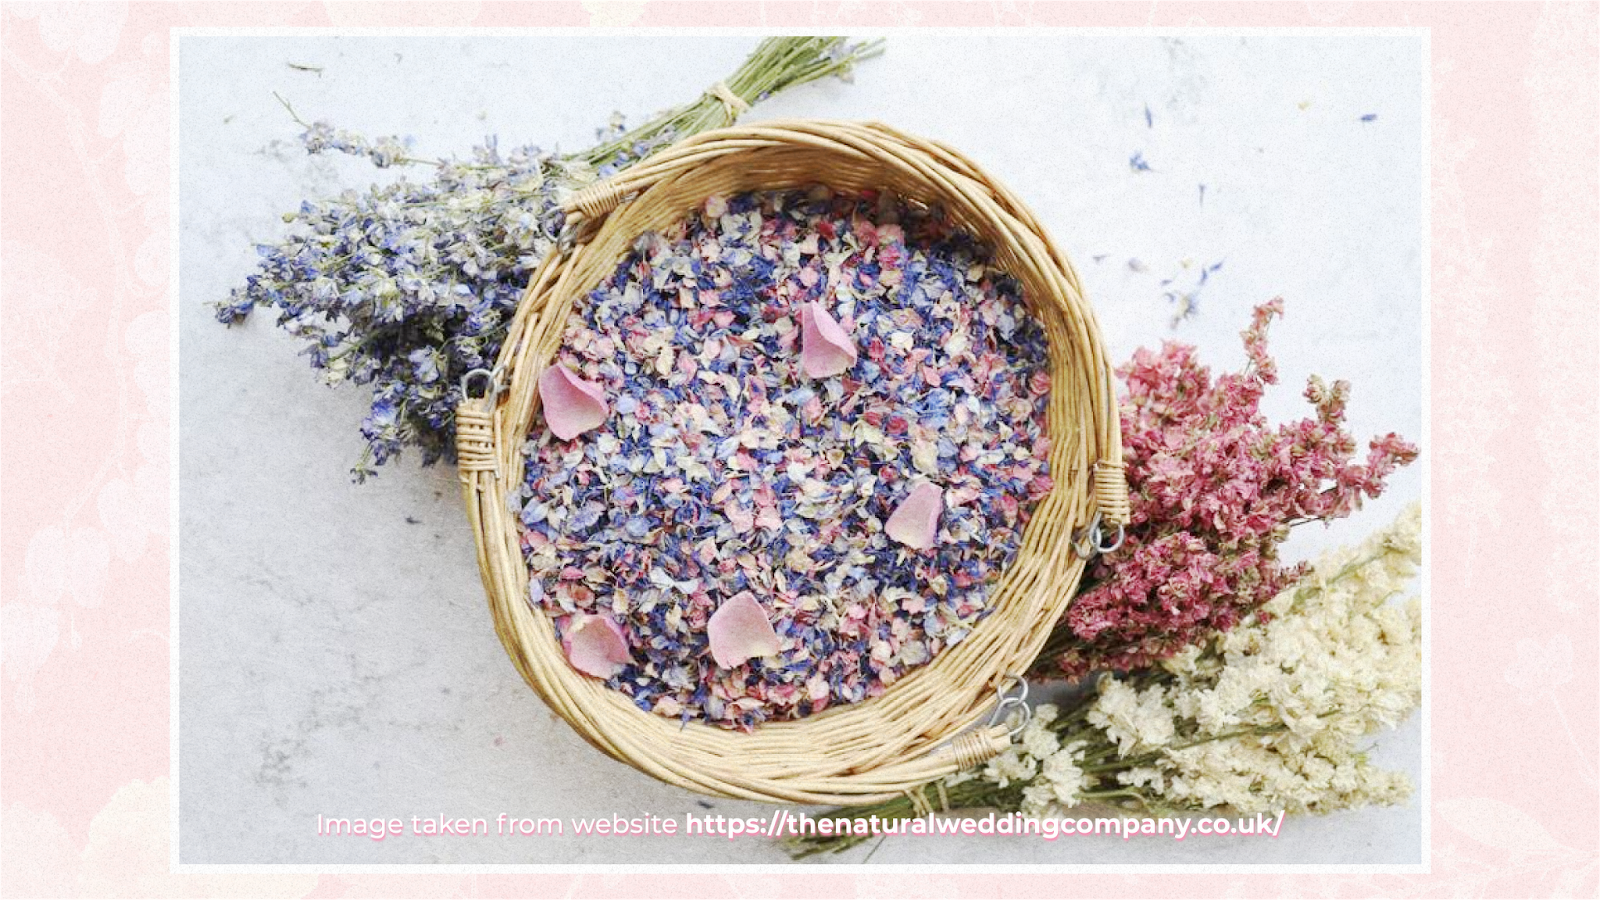 How to dry flowers for confetti